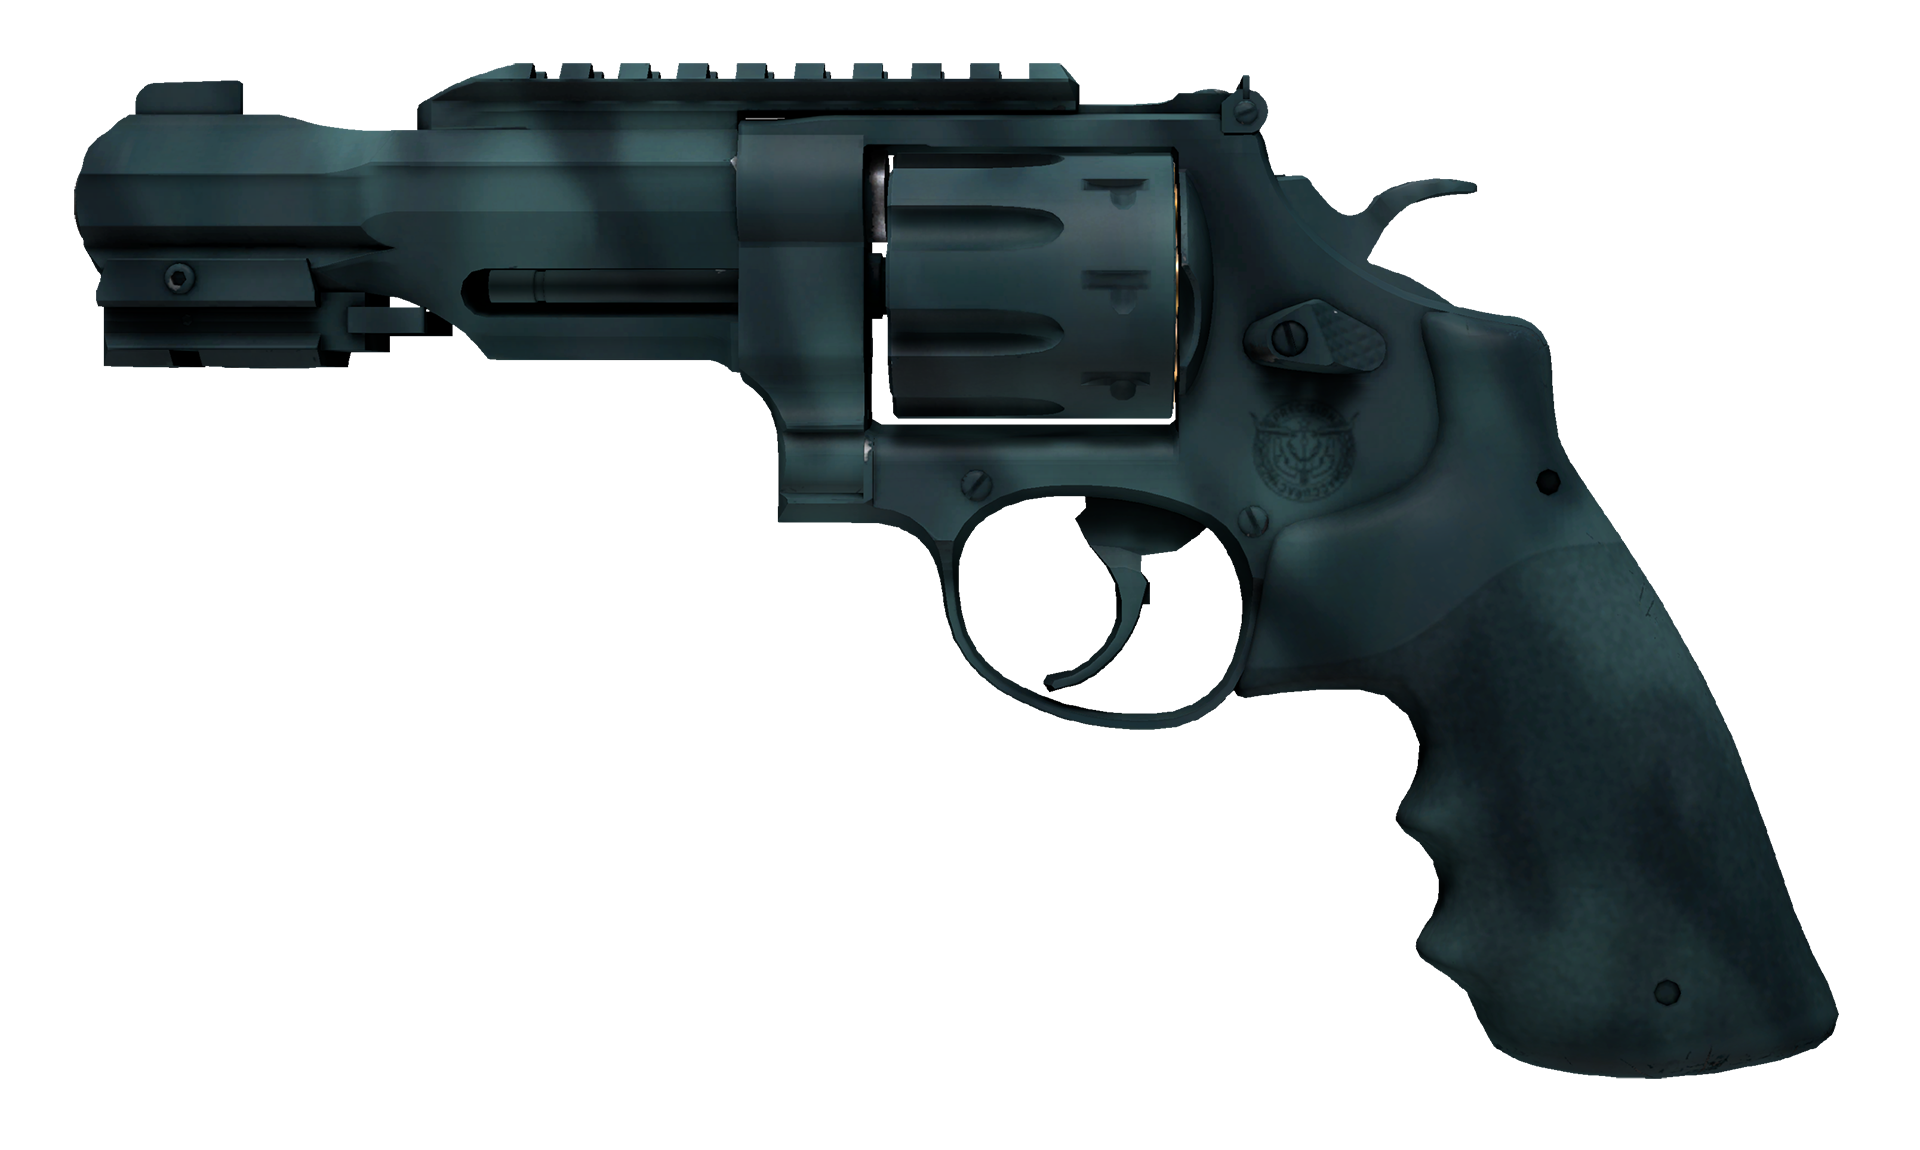 R8 Revolver Canal Spray cs go skin instal the last version for android